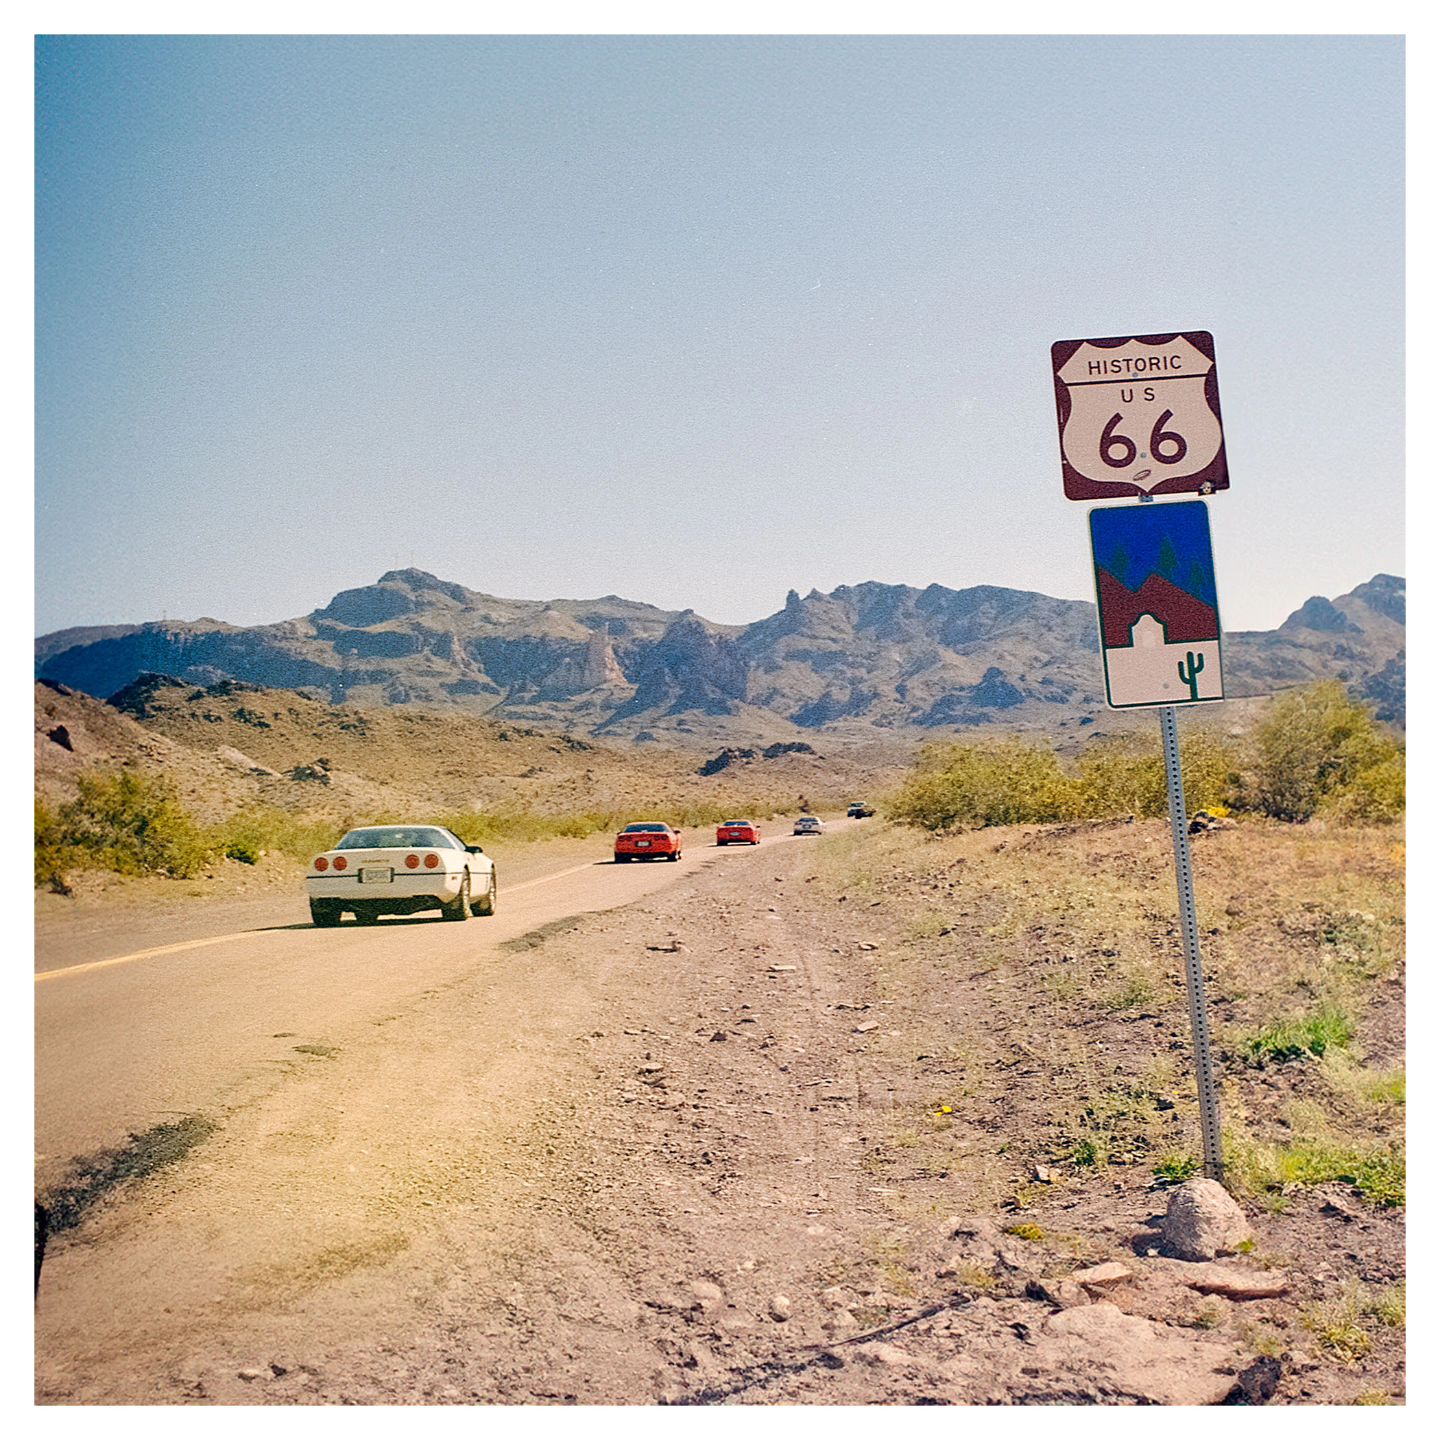 The Route 66 sign atop a lonely pole on a stretch of desert road with mountains in the background a four cars driving towards them.